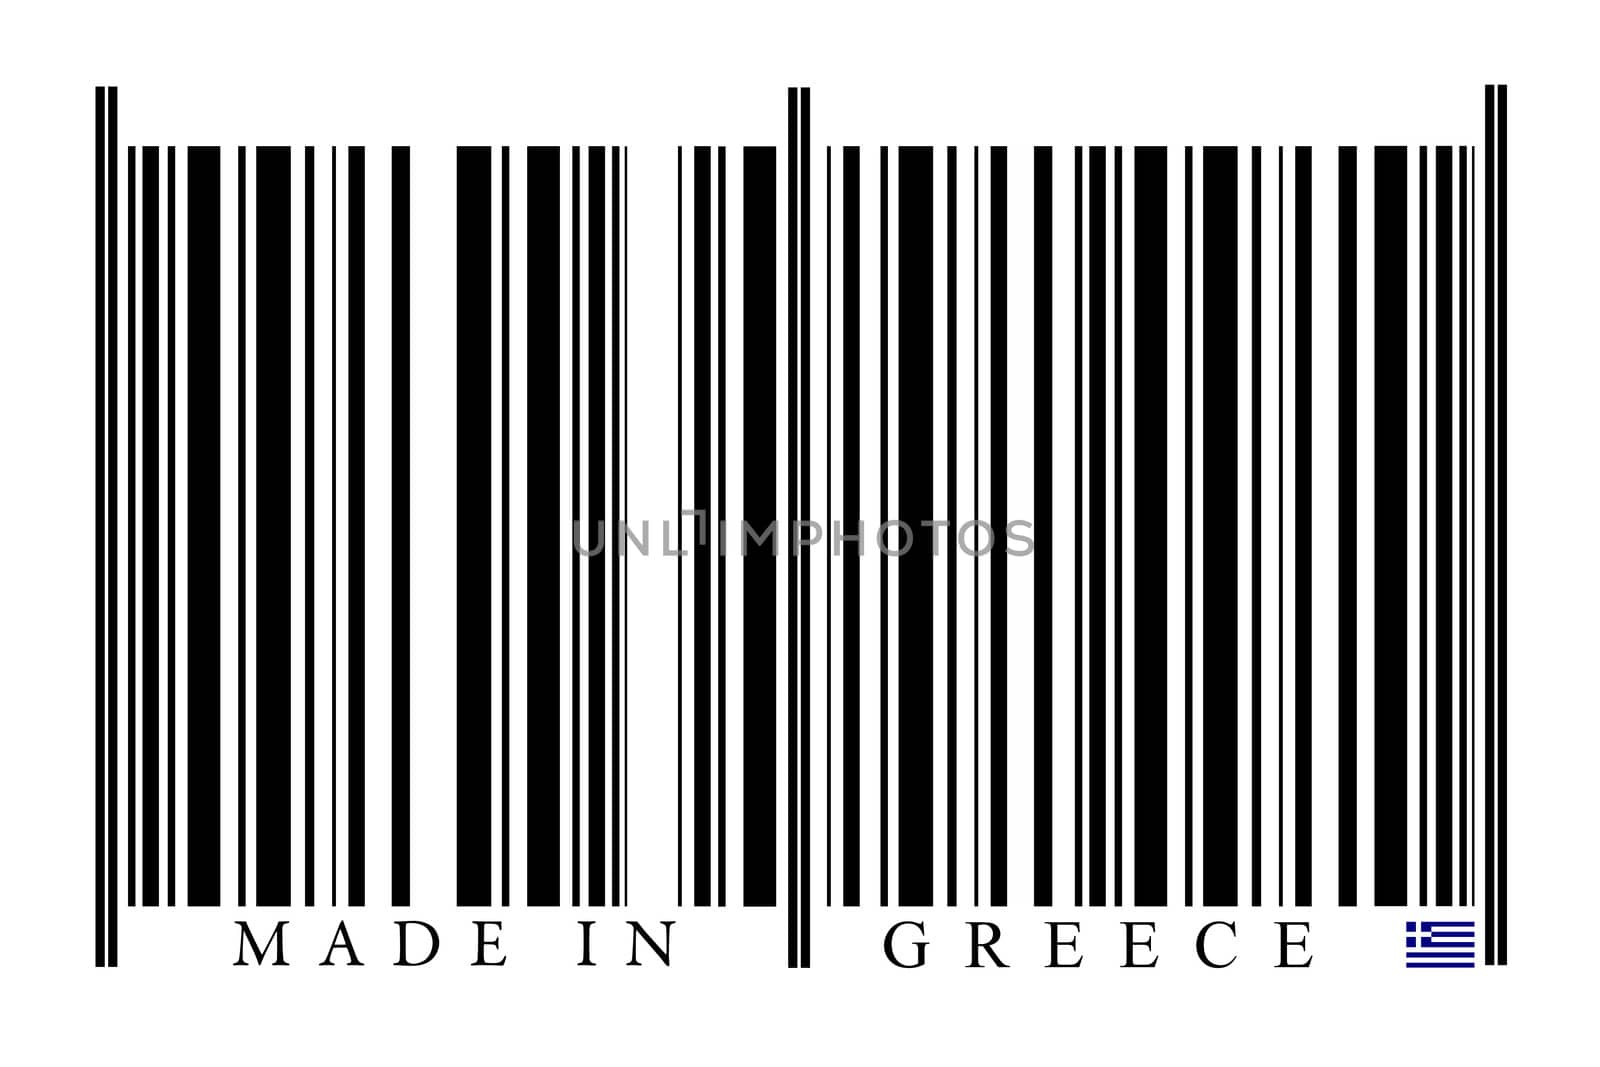 Greece Barcode on white background